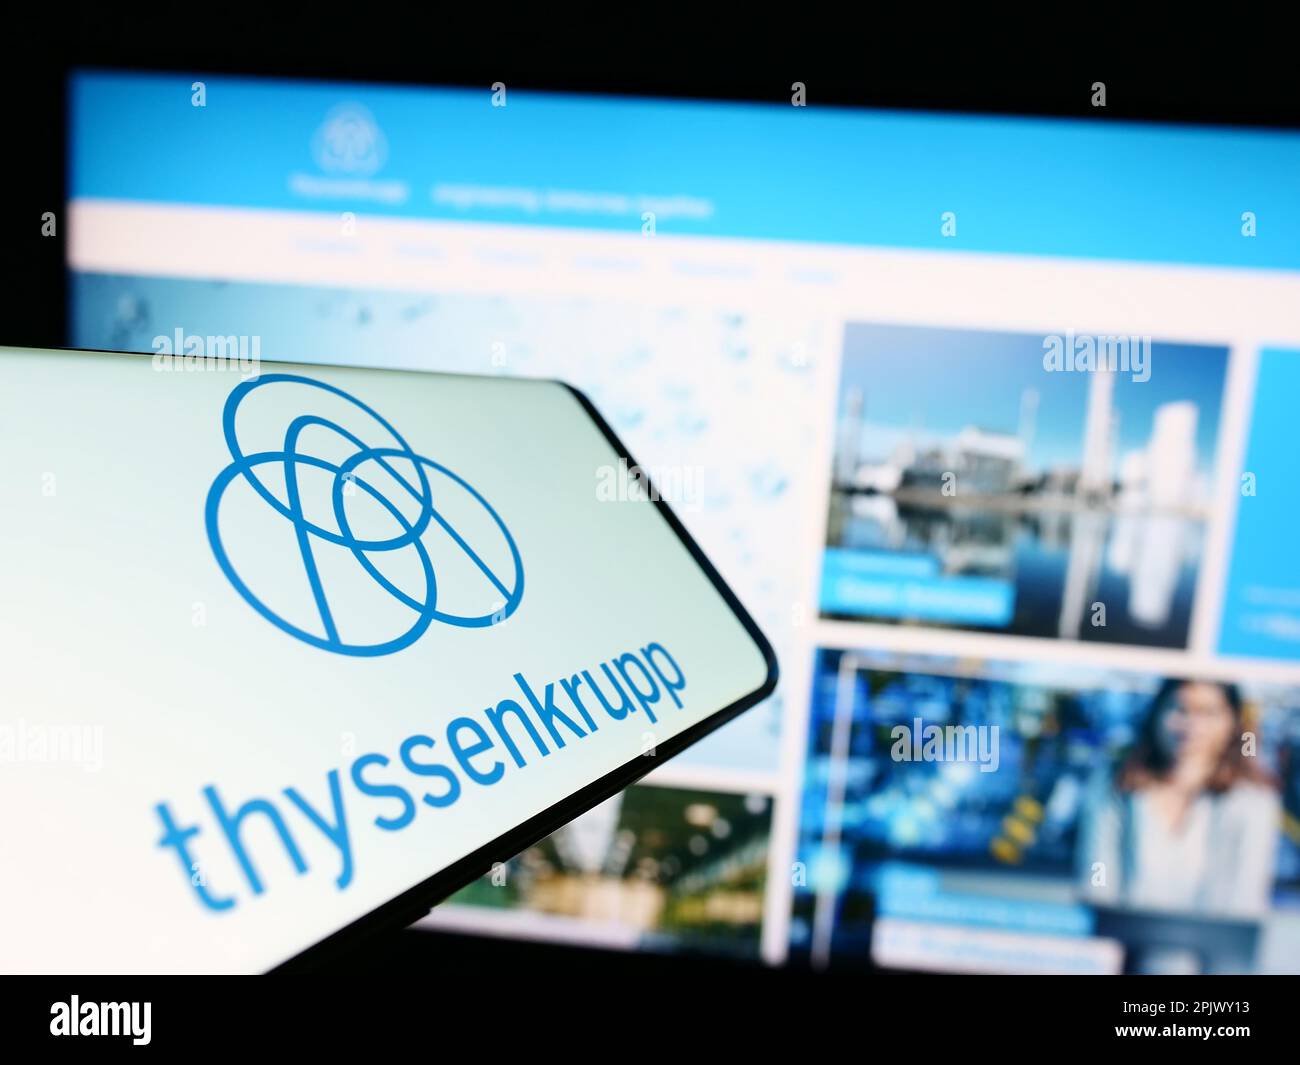 Mobile phone with logo of German conglomerate ThyssenKrupp AG on screen in front of company website. Focus on center-right of phone display. Stock Photo